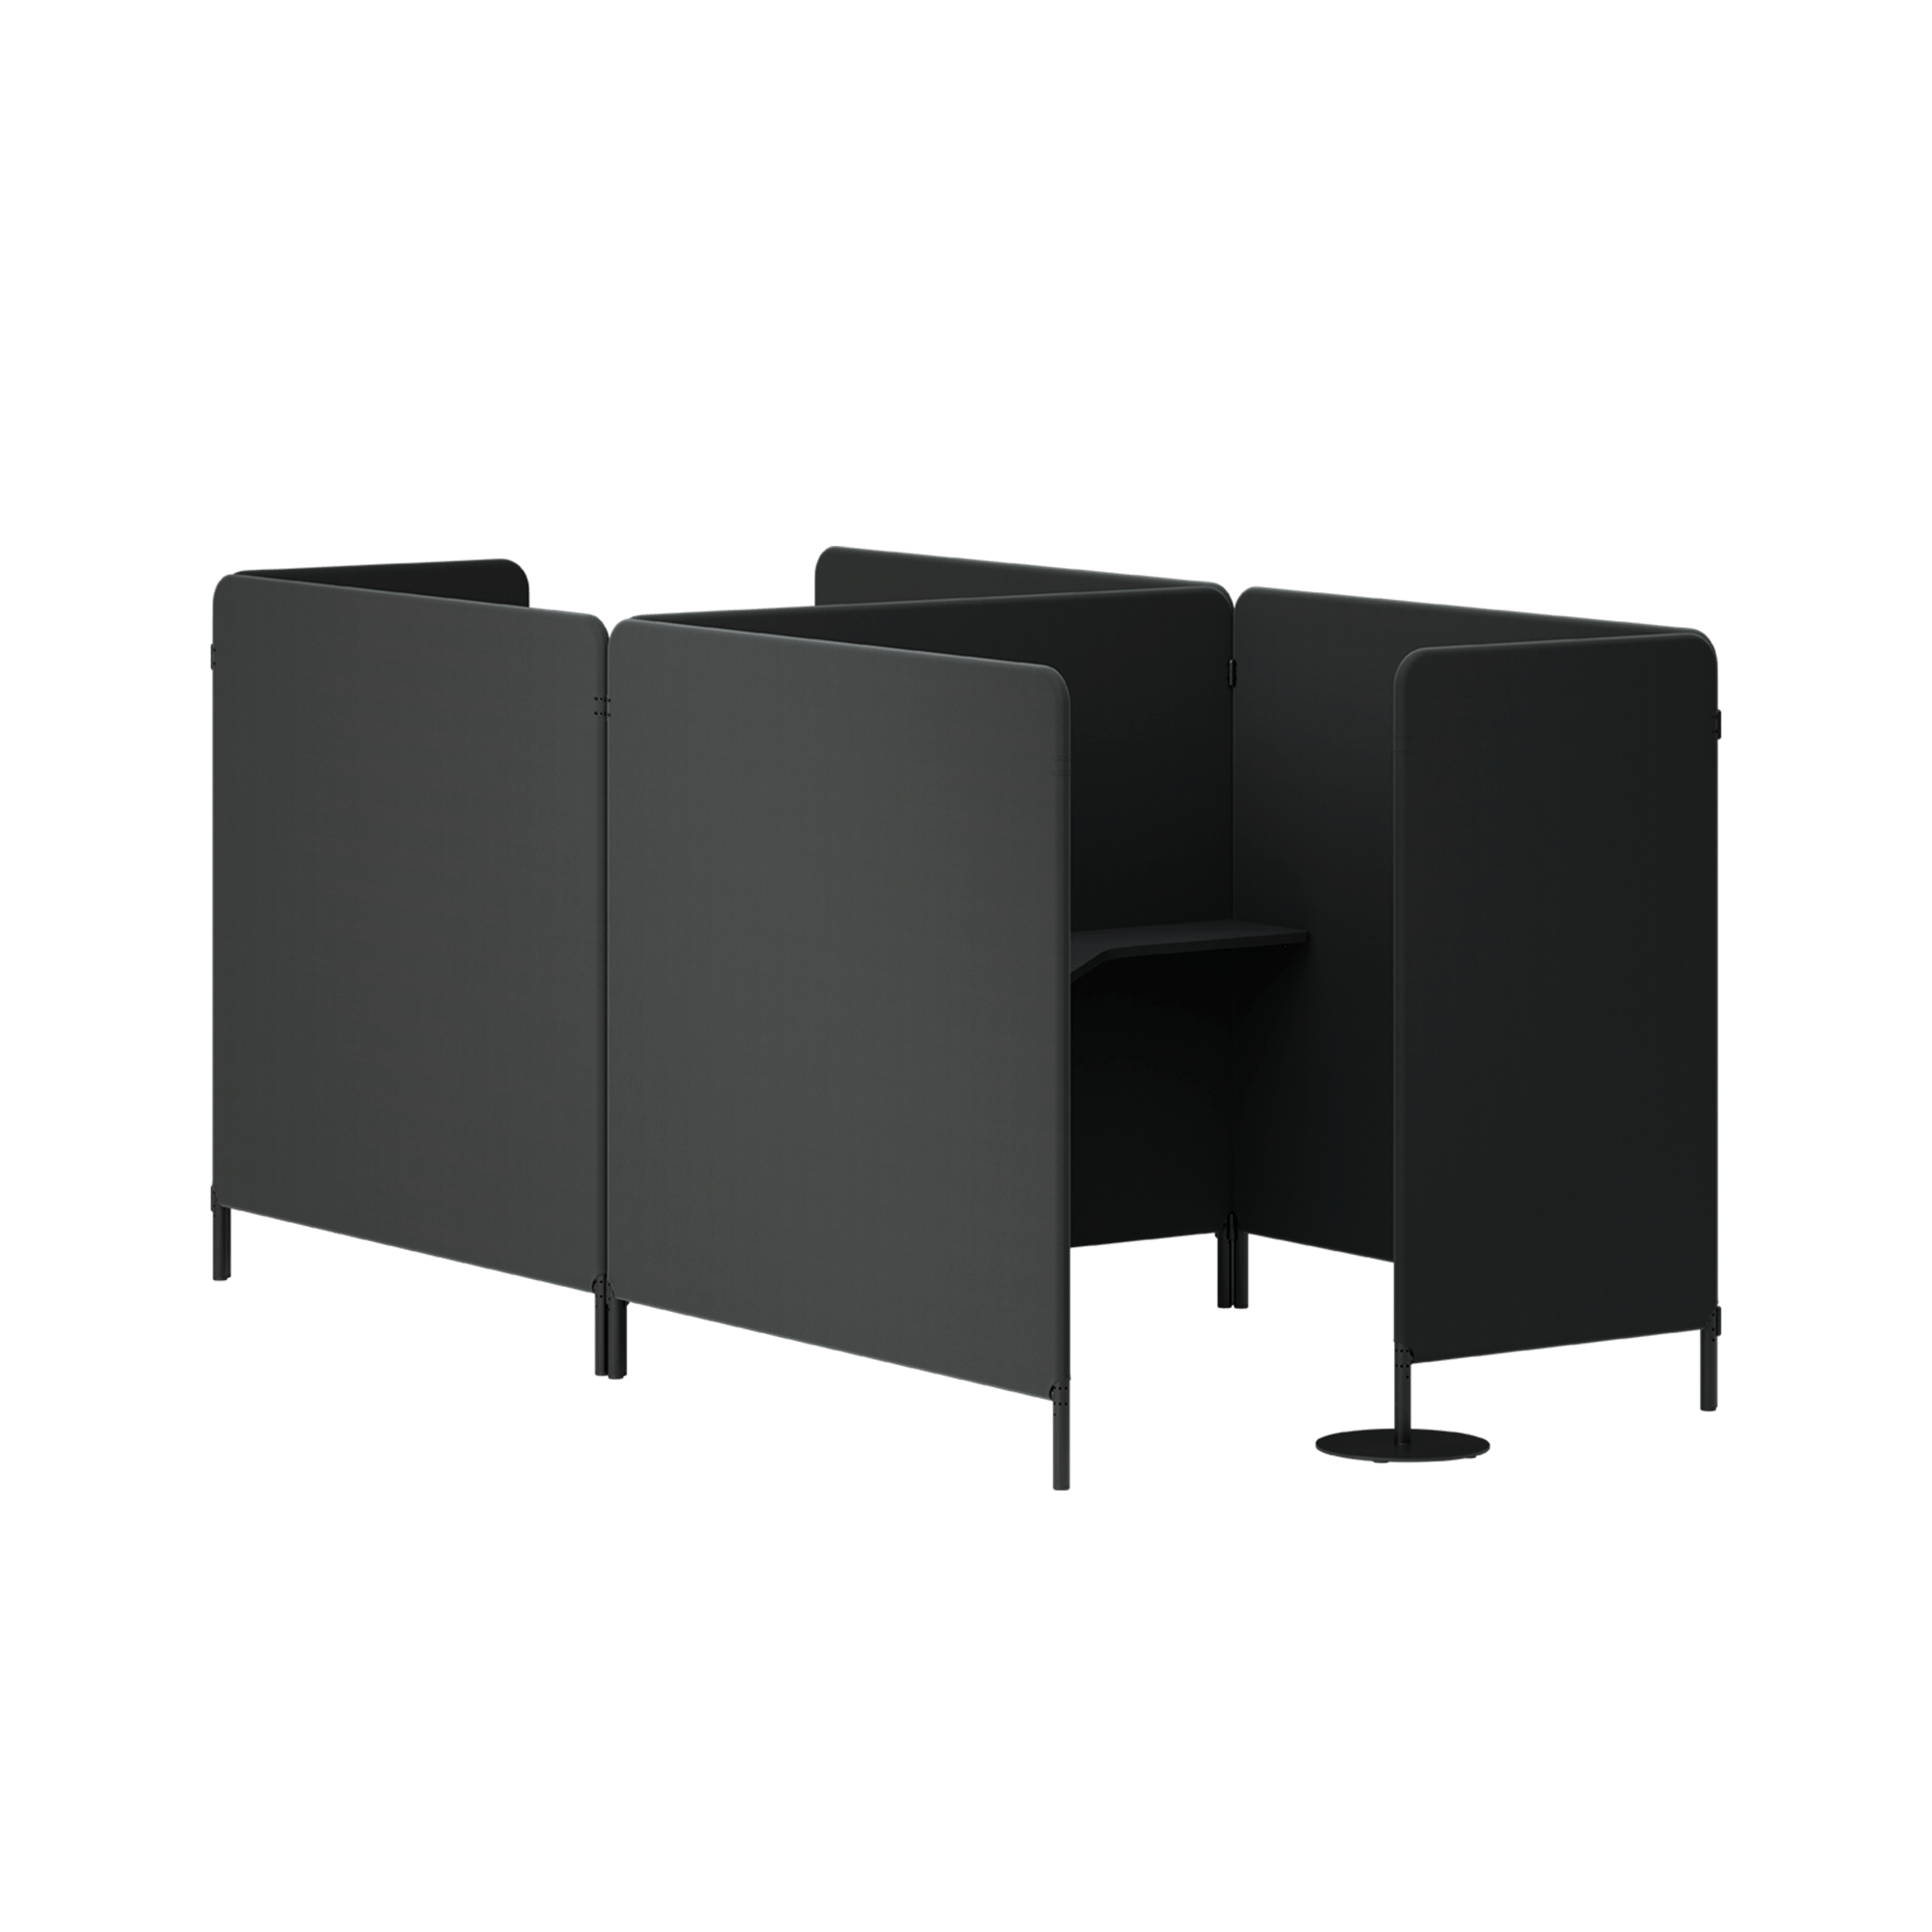 2 study booths with four side panels enclosing a desk